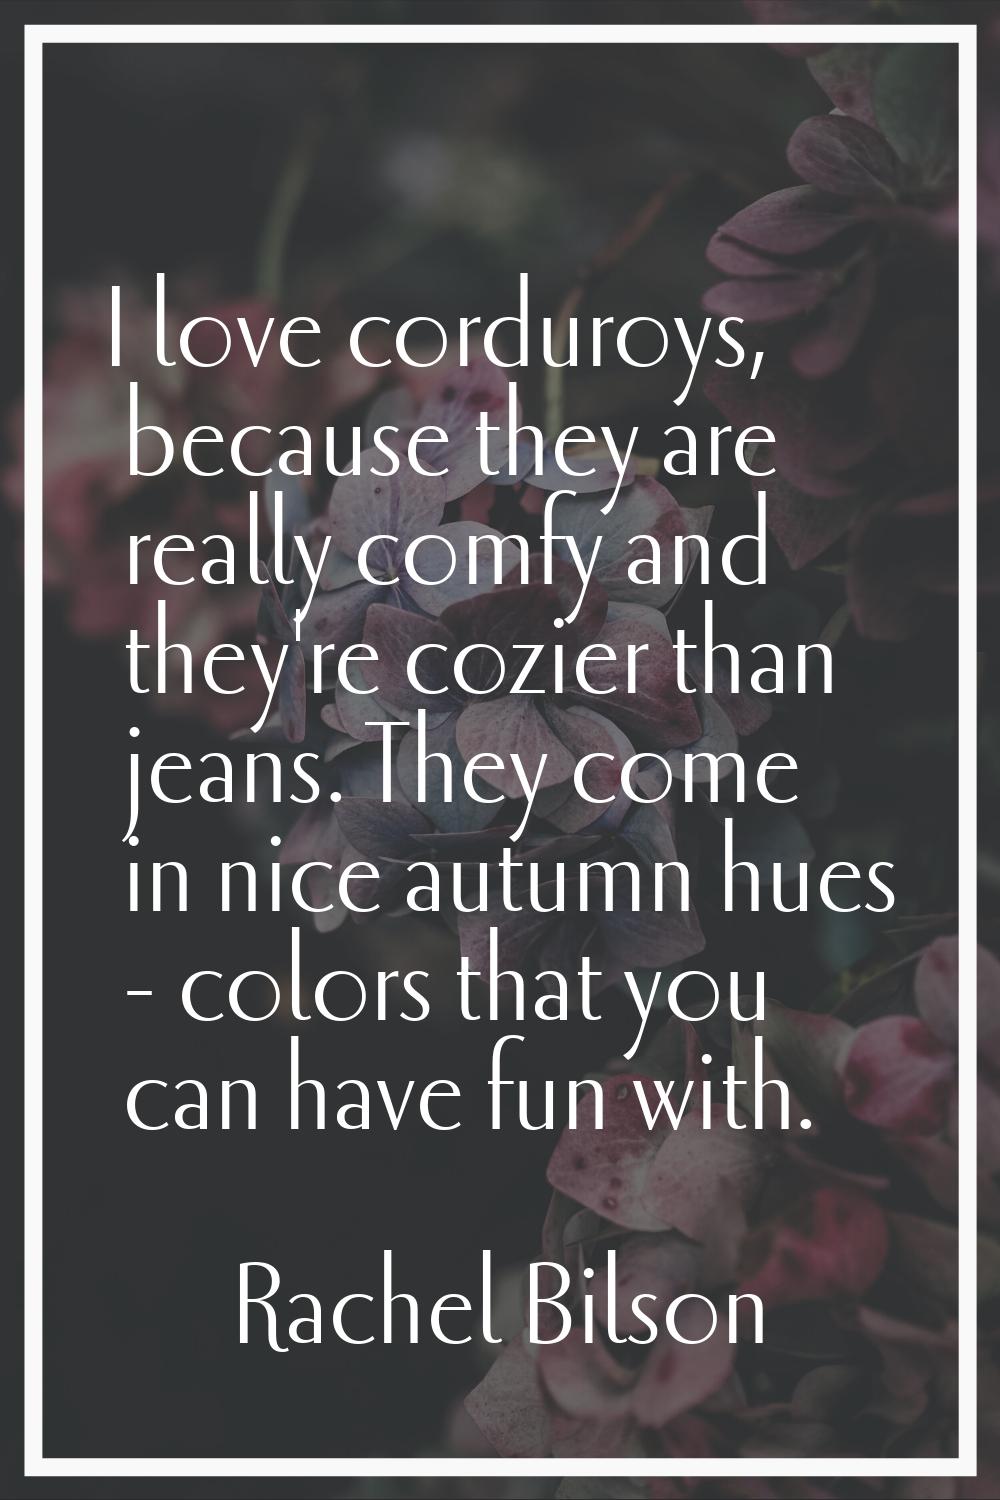 I love corduroys, because they are really comfy and they're cozier than jeans. They come in nice au